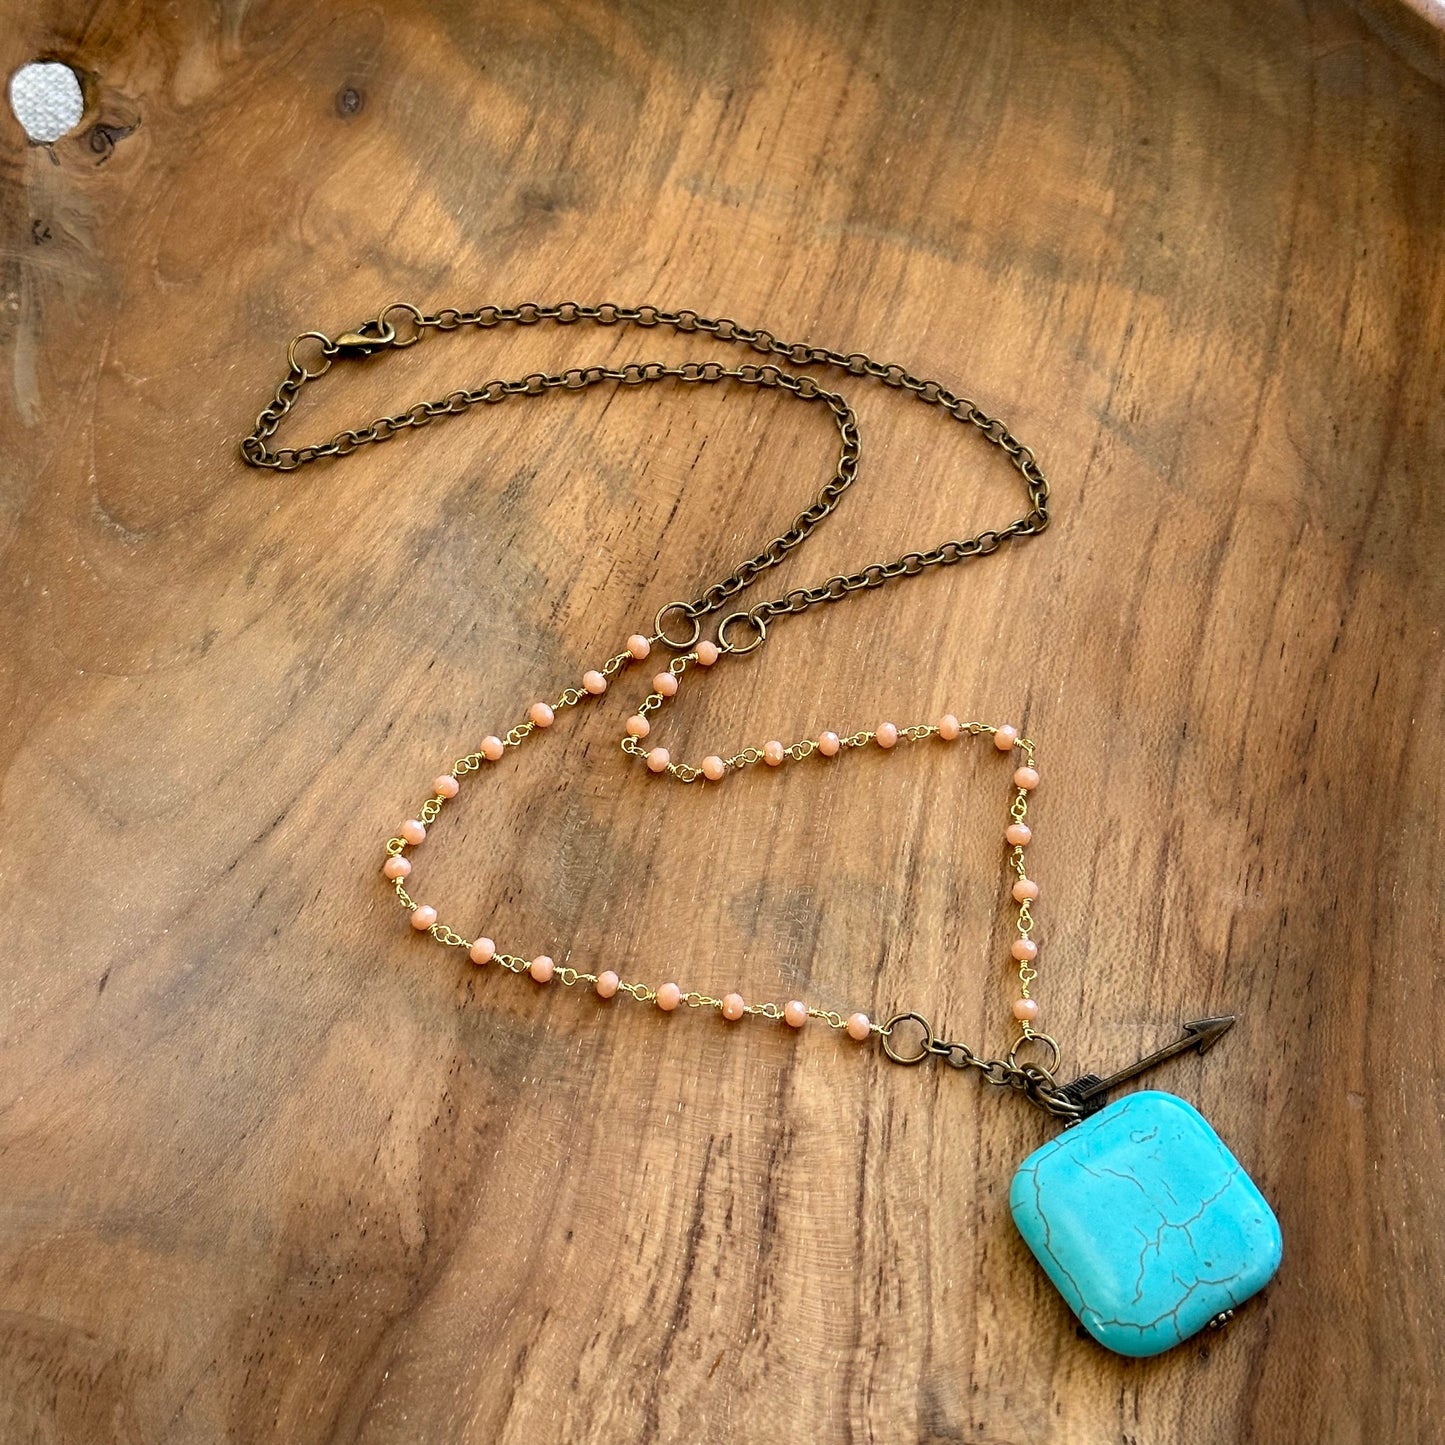 Peach Moonstone and Turquoise Magnesite Beaded Boho Necklace